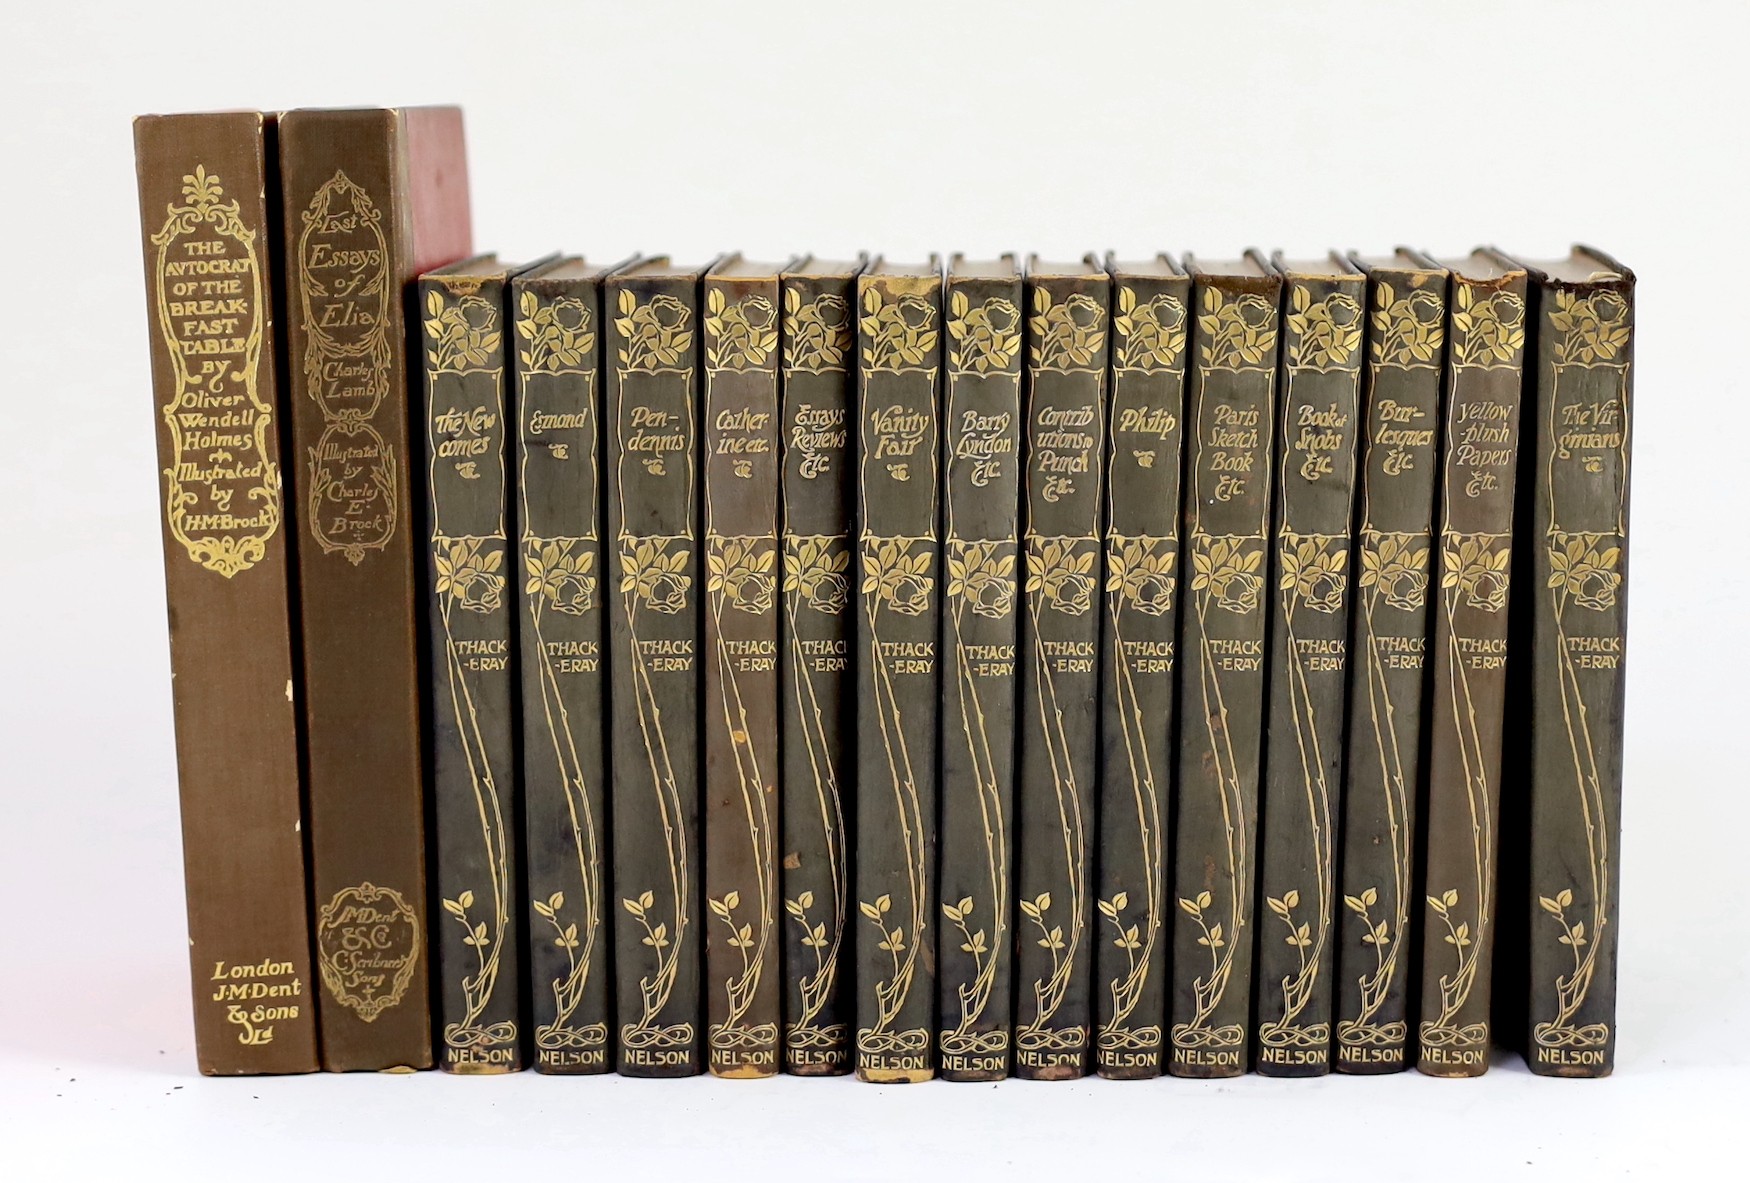 Thackeray, William Makepeace - The Complete Works…, 14 vols. New Century Edition, 8vo, black calf limp boards, gilt spines, Thomas Nelson & Sons, London, 1901; Holmes, Oliver Wendell - The Autocrat of the Breakfast Table